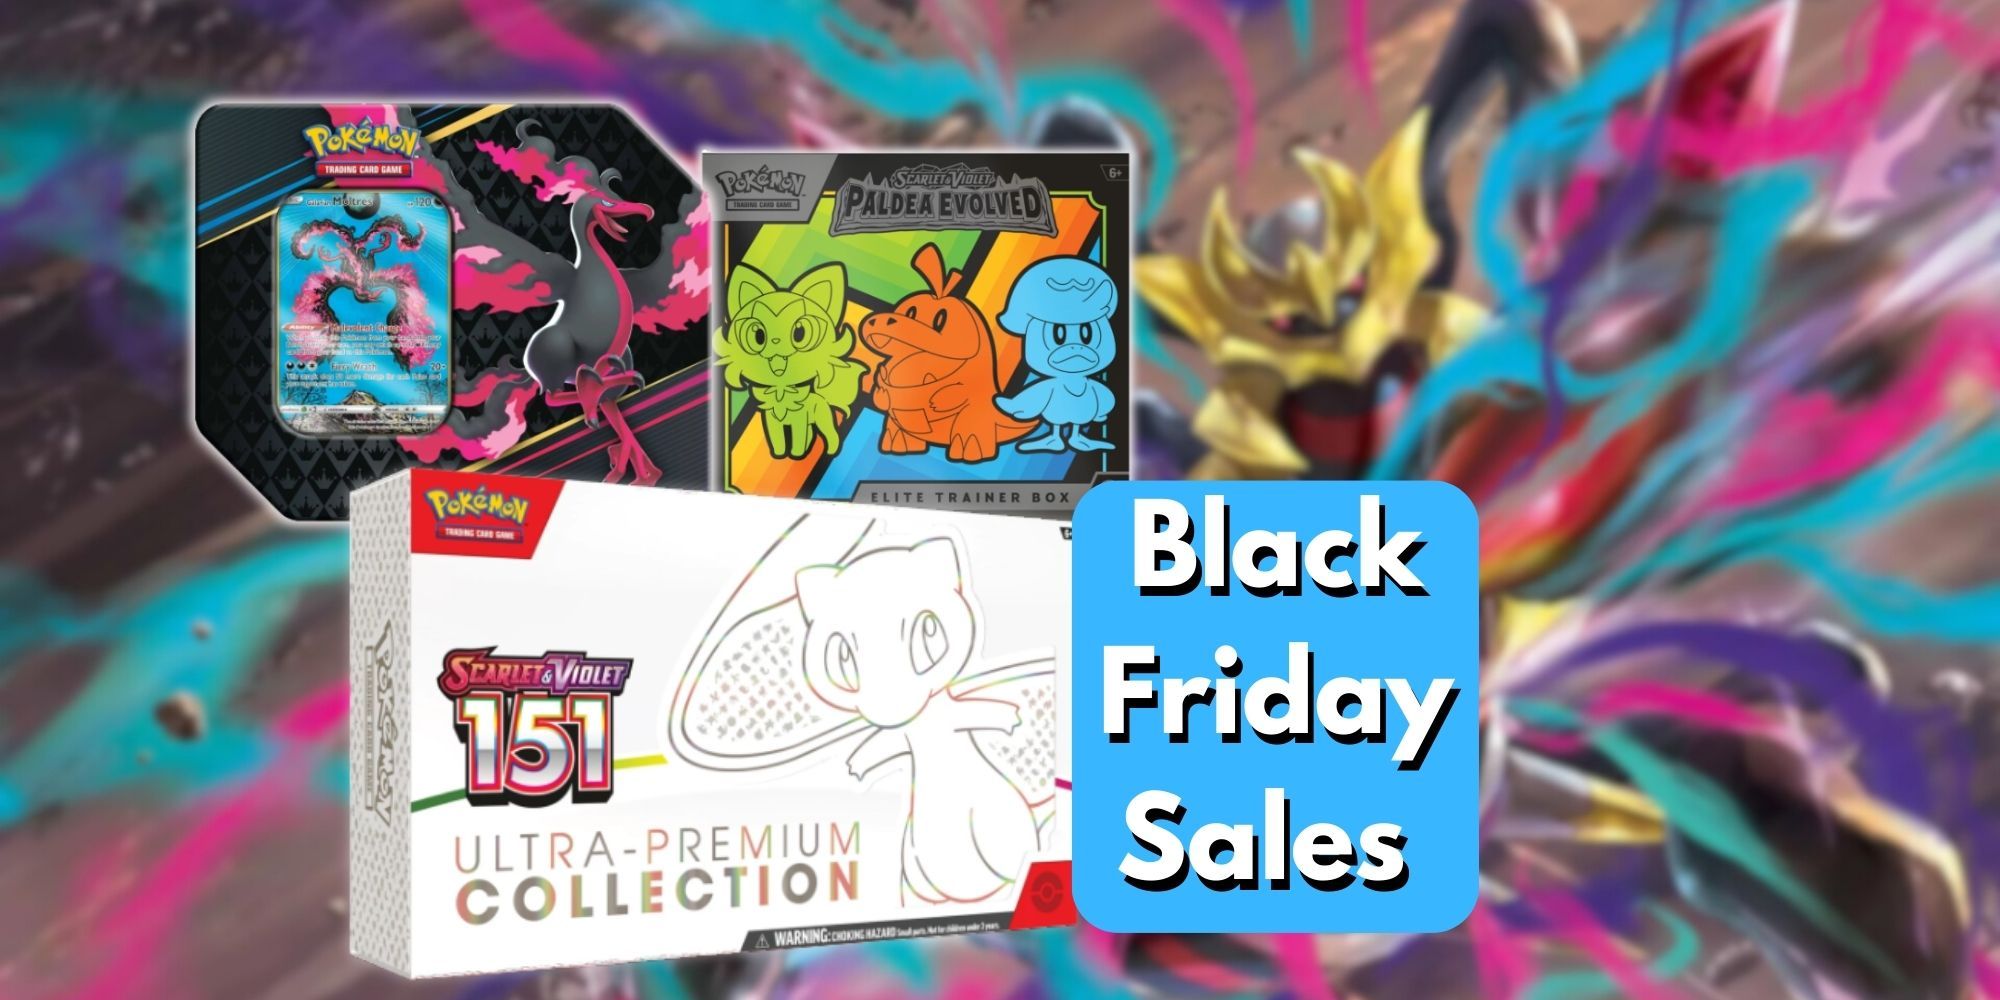 Product images from Pokemon TCG on a Giratina blurred background the a Black Friday Sales text box